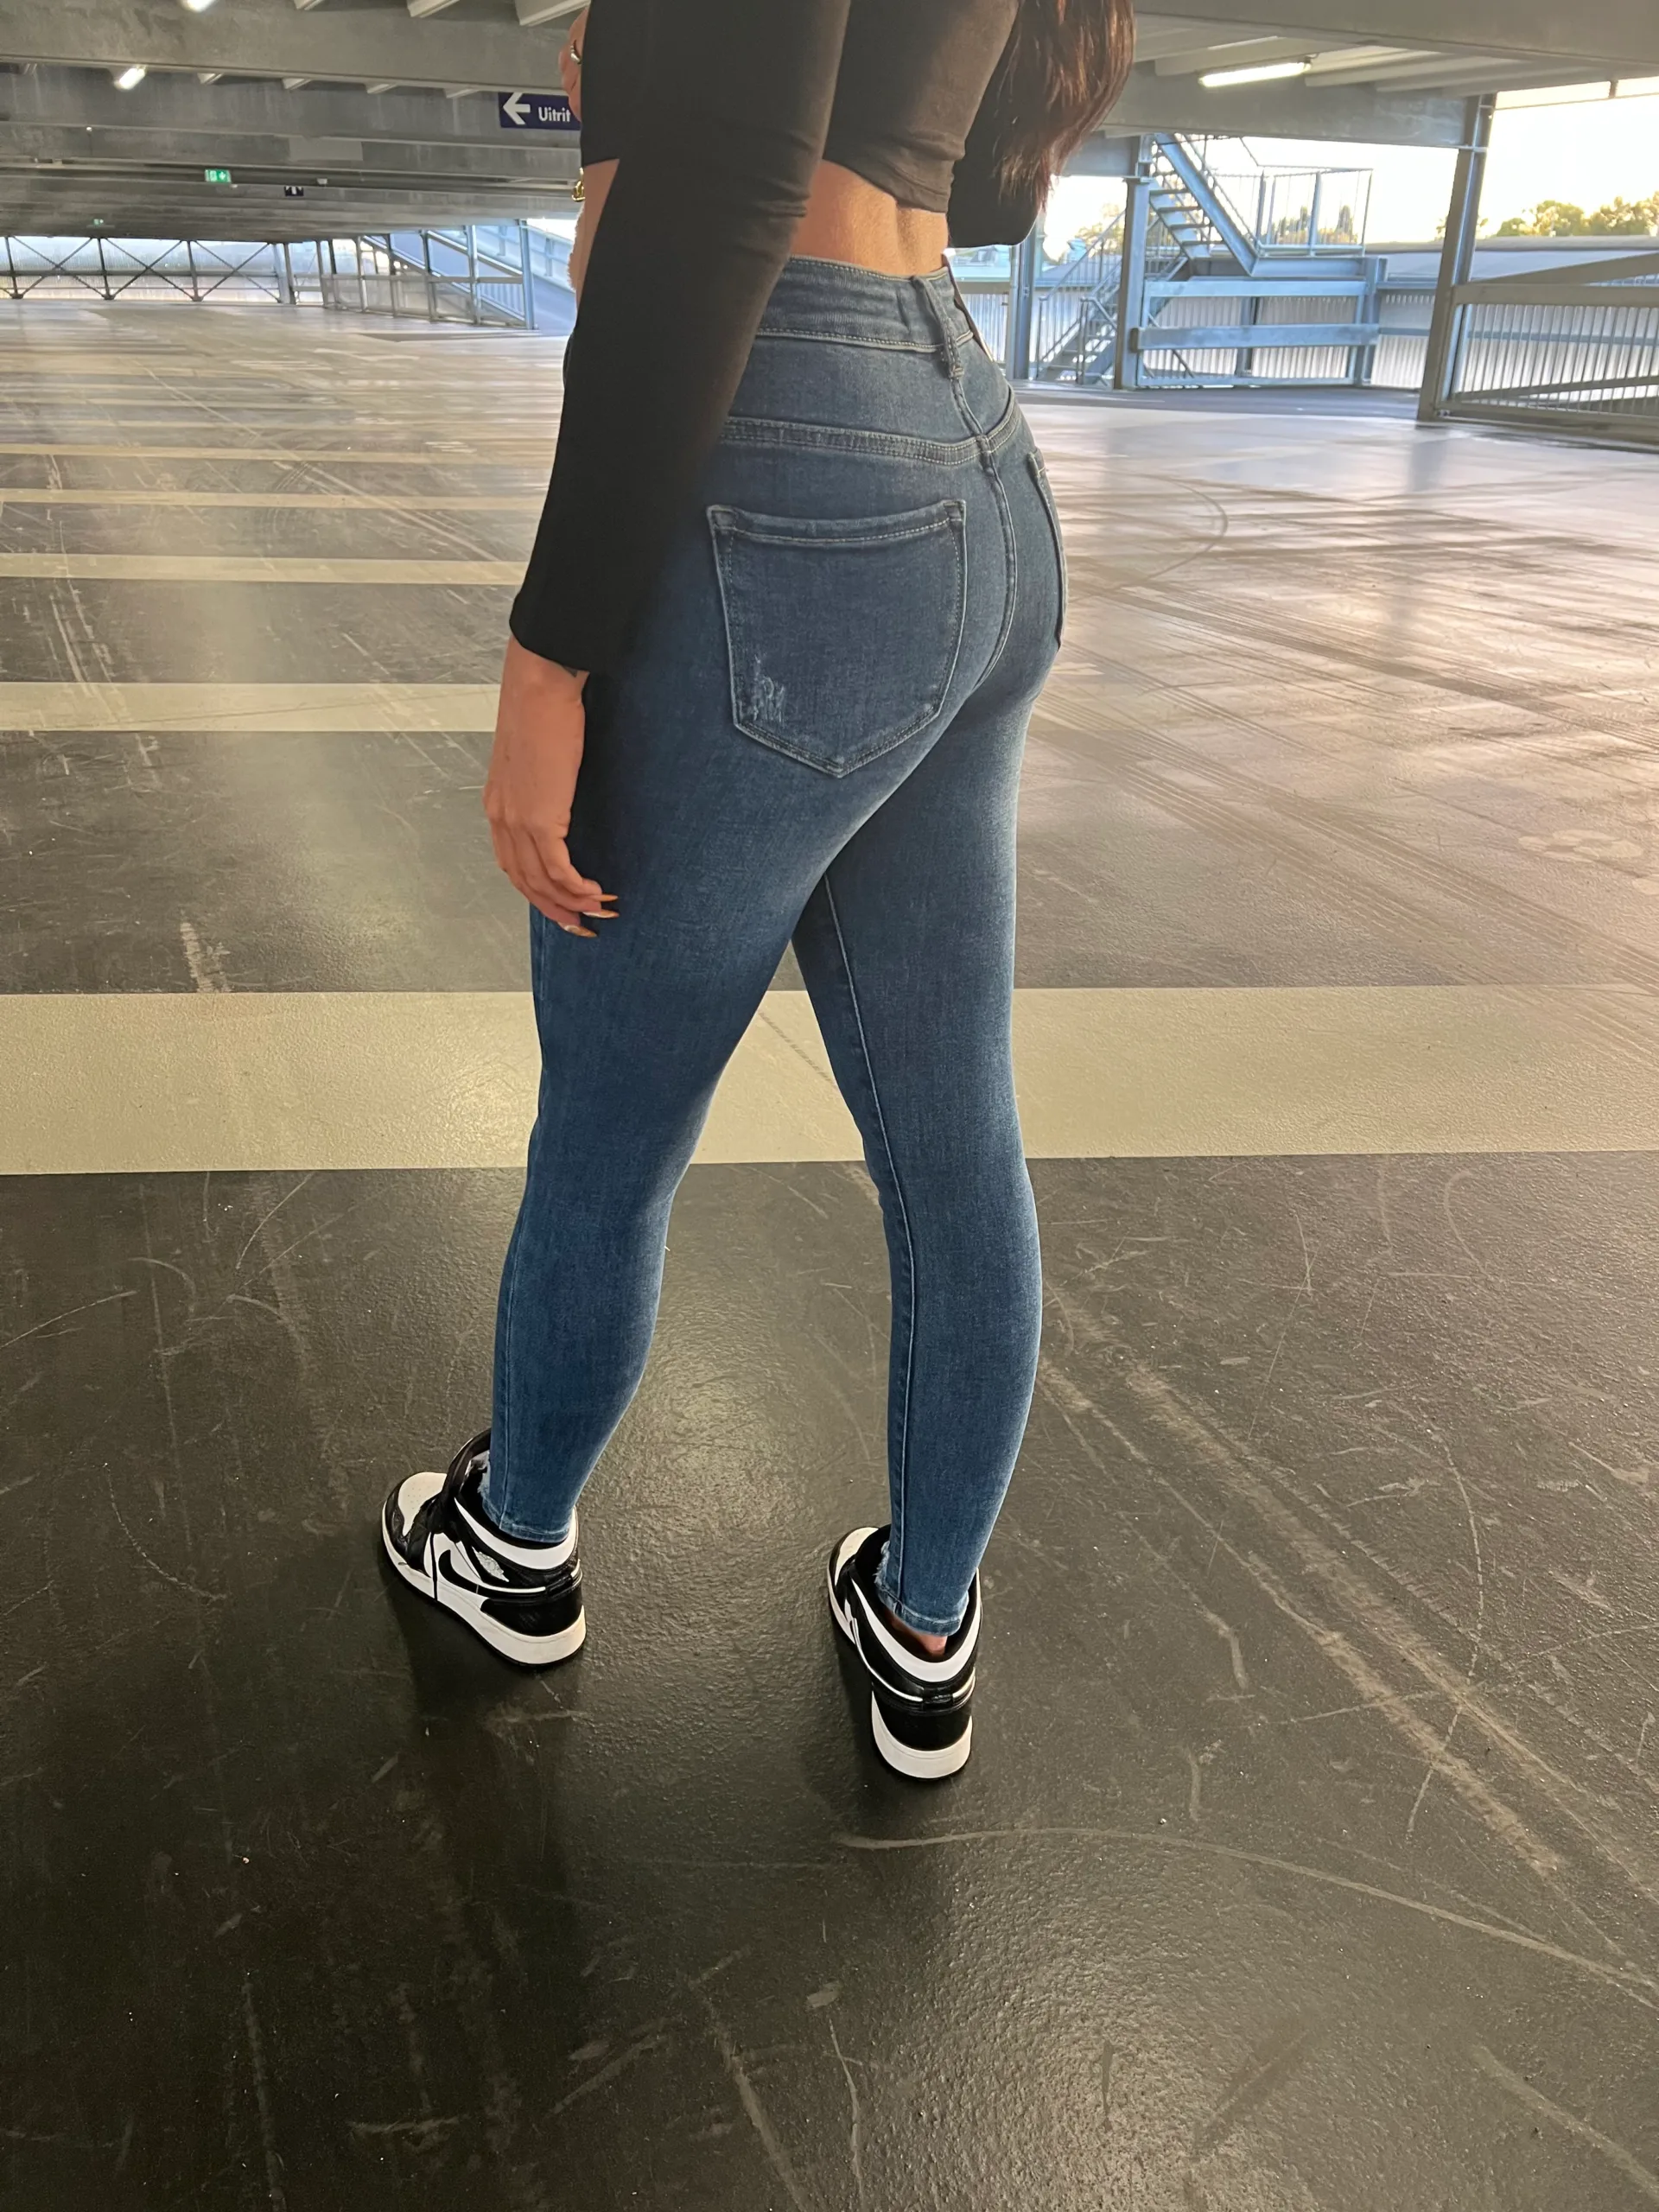 Girl wearing skintight jeans in a garage.